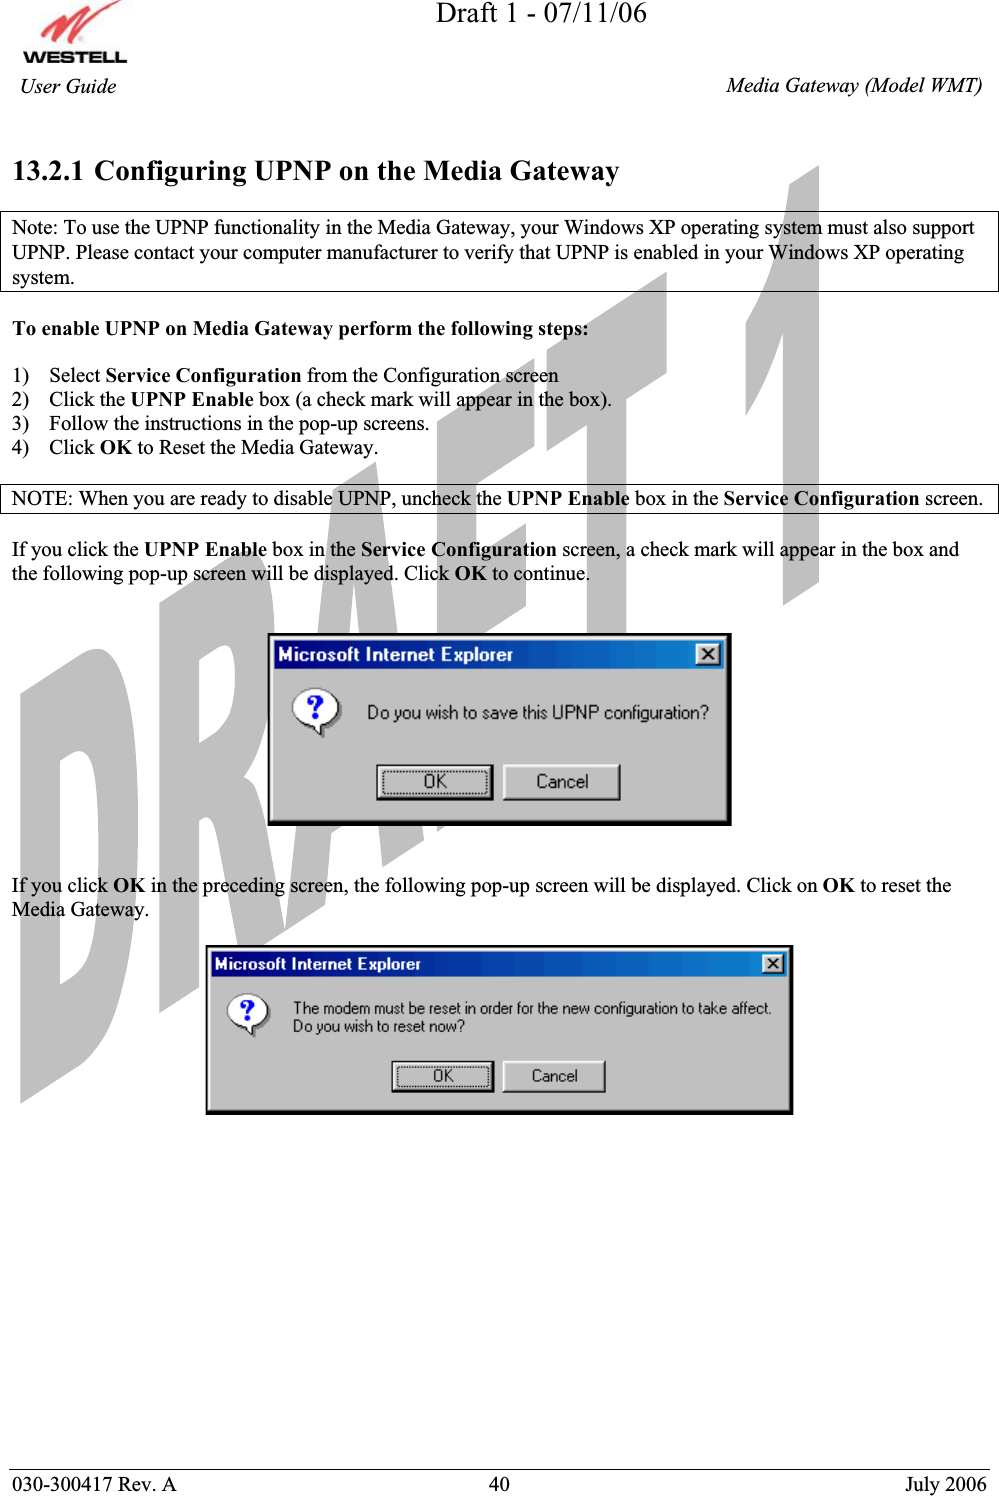 Draft 1 - 07/11/06030-300417 Rev. A  40  July 2006  Media Gateway (Model WMT) User Guide 13.2.1 Configuring UPNP on the Media Gateway Note: To use the UPNP functionality in the Media Gateway, your Windows XP operating system must also support UPNP. Please contact your computer manufacturer to verify that UPNP is enabled in your Windows XP operating system. To enable UPNP on Media Gateway perform the following steps: 1) Select Service Configuration from the Configuration screen 2) Click the UPNP Enable box (a check mark will appear in the box). 3) Follow the instructions in the pop-up screens. 4) Click OK to Reset the Media Gateway. NOTE: When you are ready to disable UPNP, uncheck the UPNP Enable box in the Service Configuration screen. If you click the UPNP Enable box in the Service Configuration screen, a check mark will appear in the box and the following pop-up screen will be displayed. Click OK to continue. If you click OK in the preceding screen, the following pop-up screen will be displayed. Click on OK to reset the Media Gateway.  